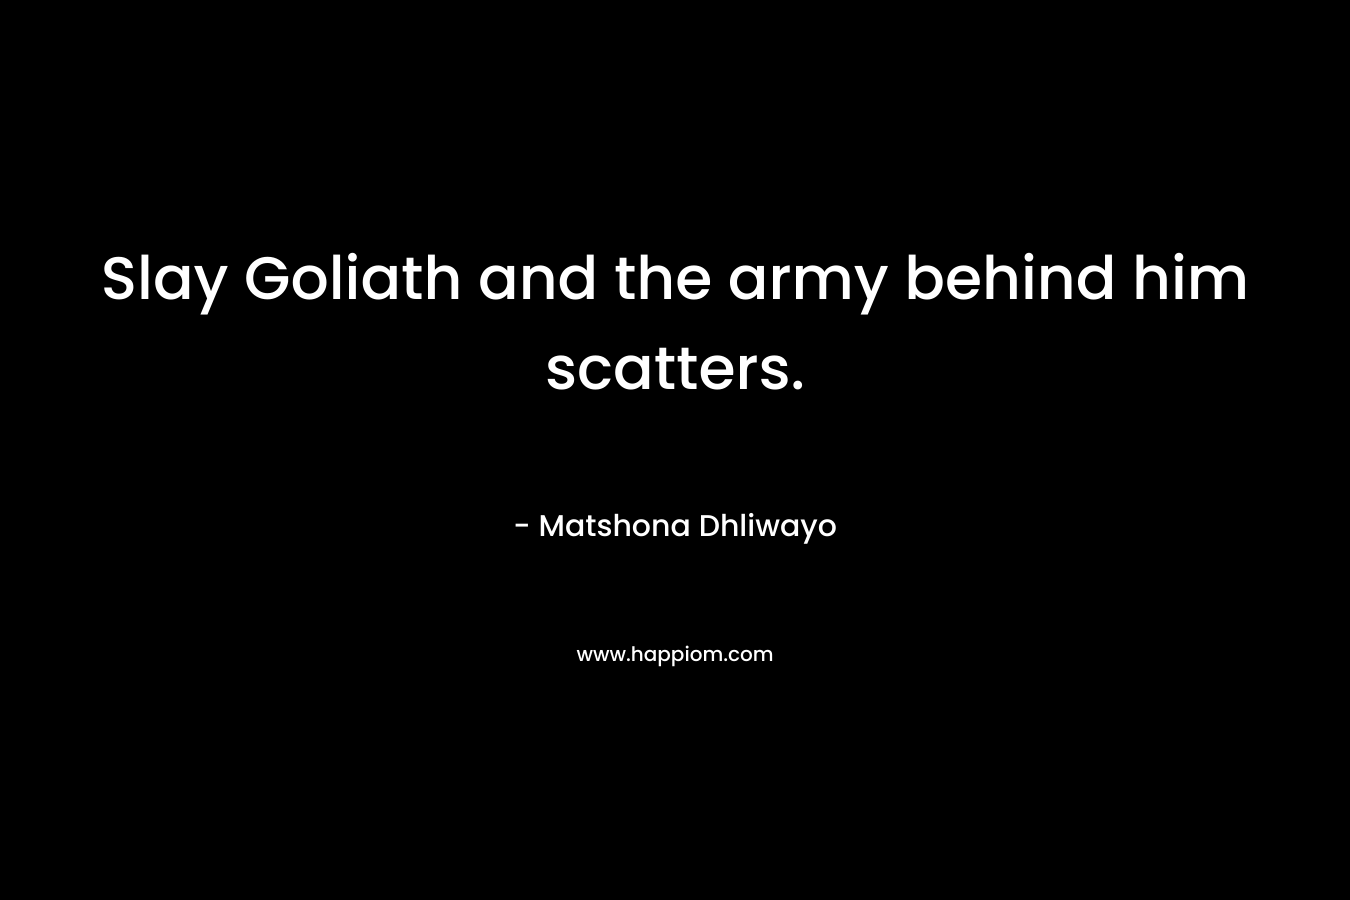 Slay Goliath and the army behind him scatters. – Matshona Dhliwayo